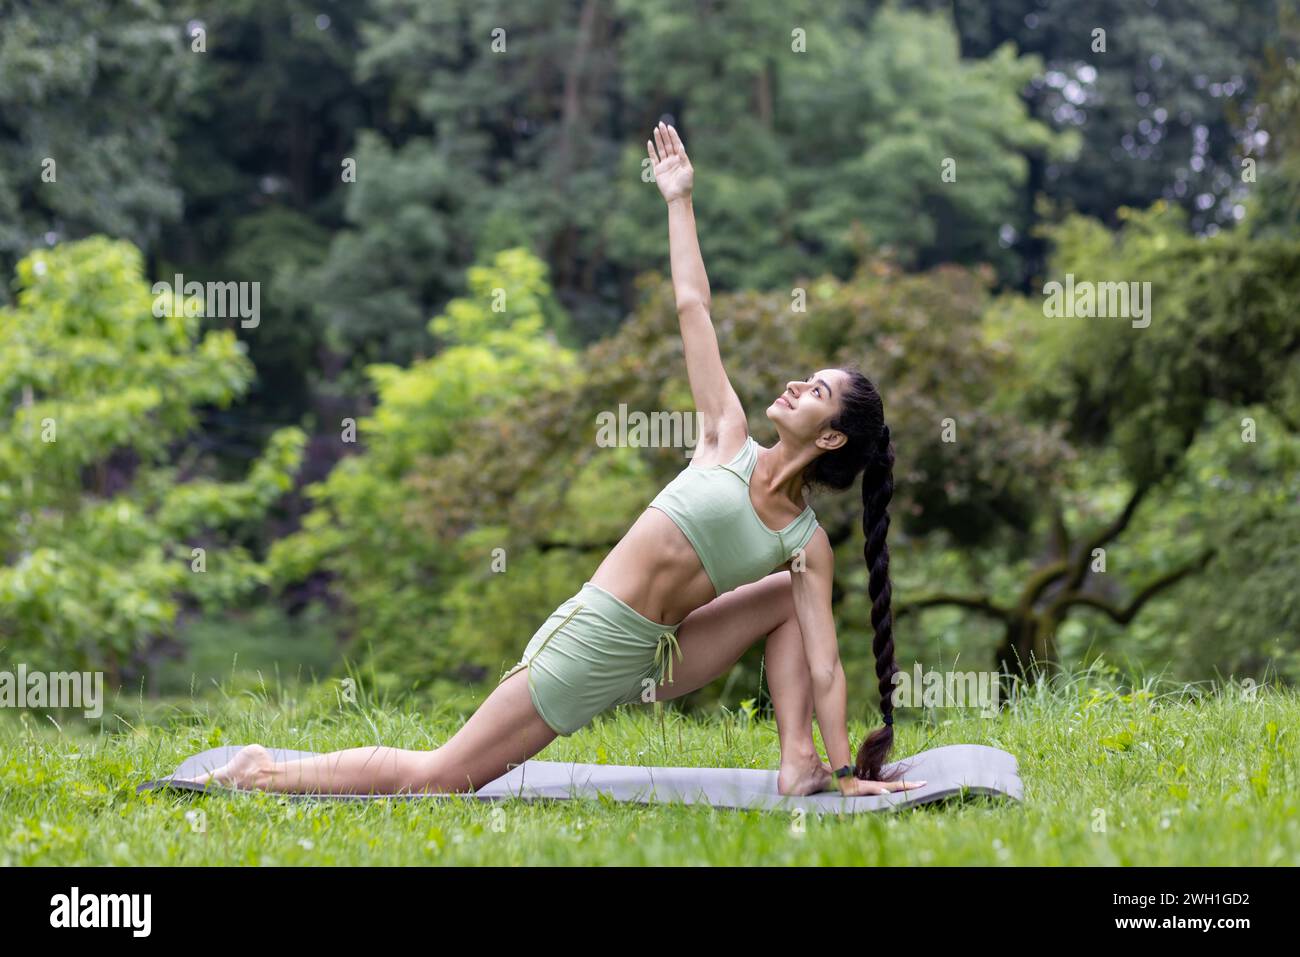 Serene Indian woman in a green tracksuit practices yoga in a tranquil park setting, striking a pose on her mat among lush trees. Stock Photo